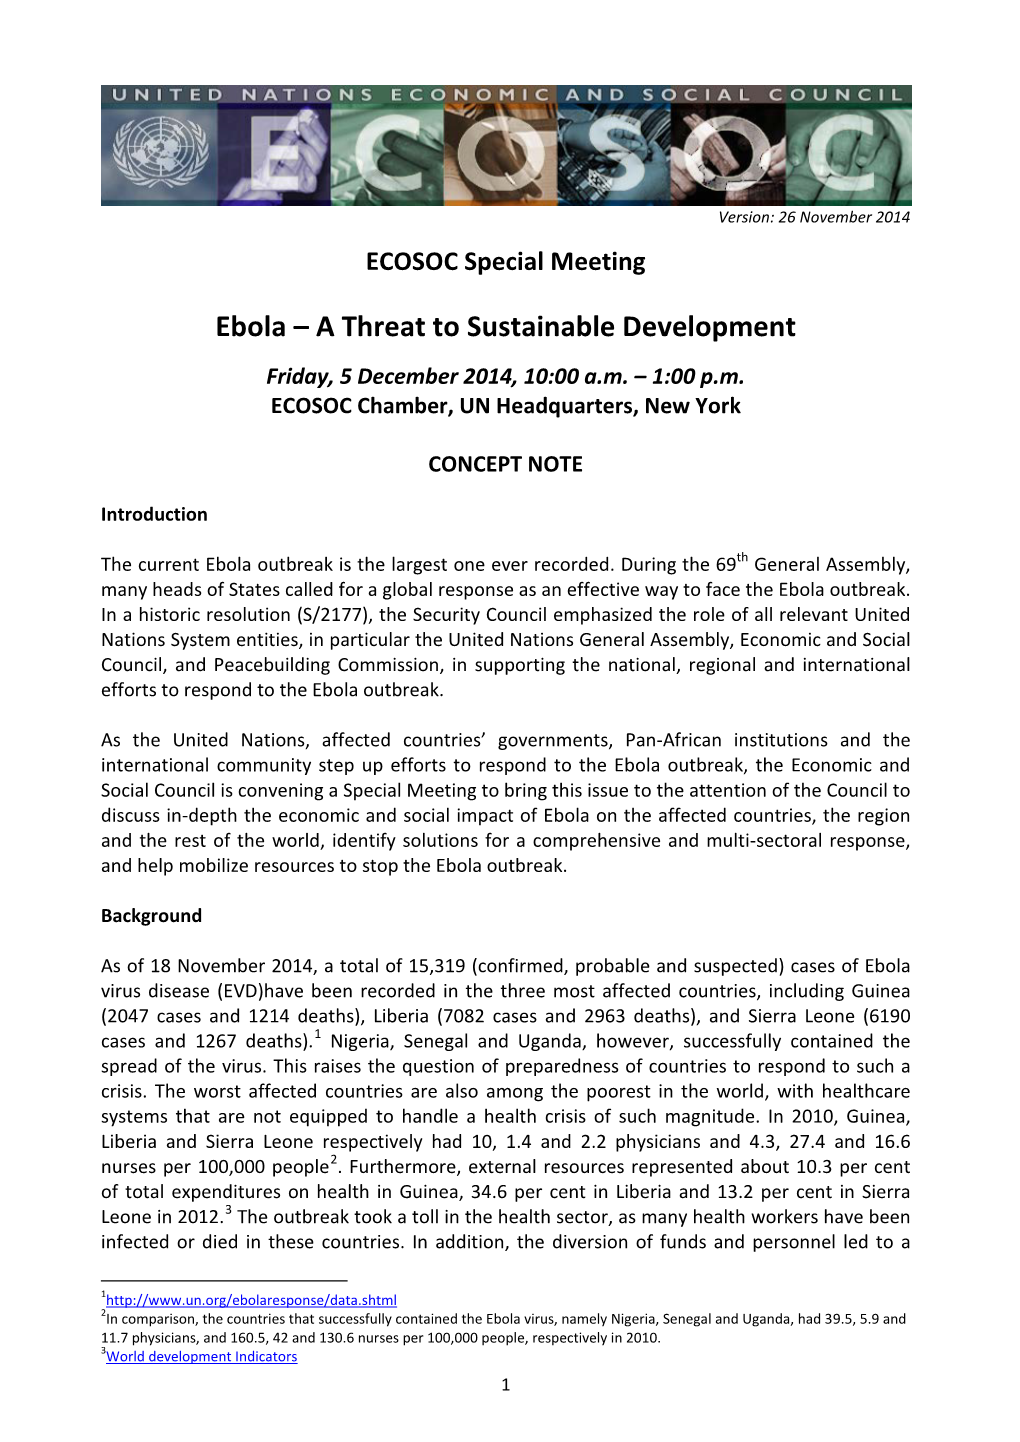 Ebola – a Threat to Sustainable Development